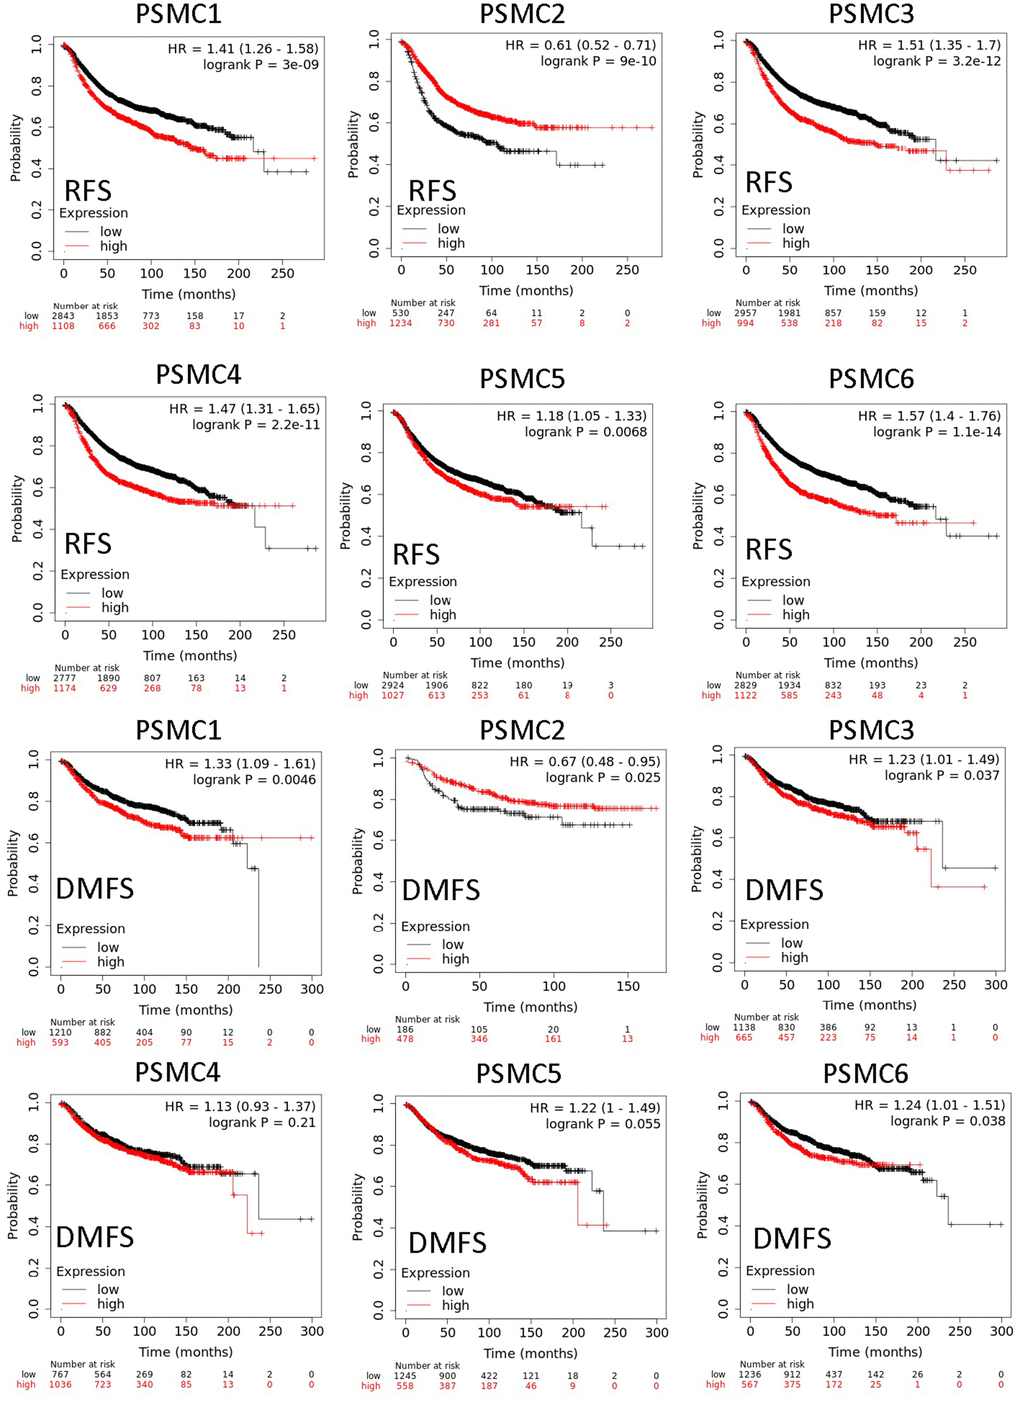 Relationship between expressions of proteasome 26S subunit, ATPase (PSMC) family members with recurrence-free survival (RFS) and distant metastasis-free survival (DMFS) from clinical breast cancer patients (n=2898). Kaplan–Meier plots show correlations of RFS and DMFS in breast cancer patients with high and low expression levels of PSMC family members using the median of expression as the cutoff. Red and black lines respectively represent higher and lower values than the median. High expression levels of most PSMC members were associated with poor survival, whereas high expression levels of PSMC2 were associated with significantly better survival rates (p